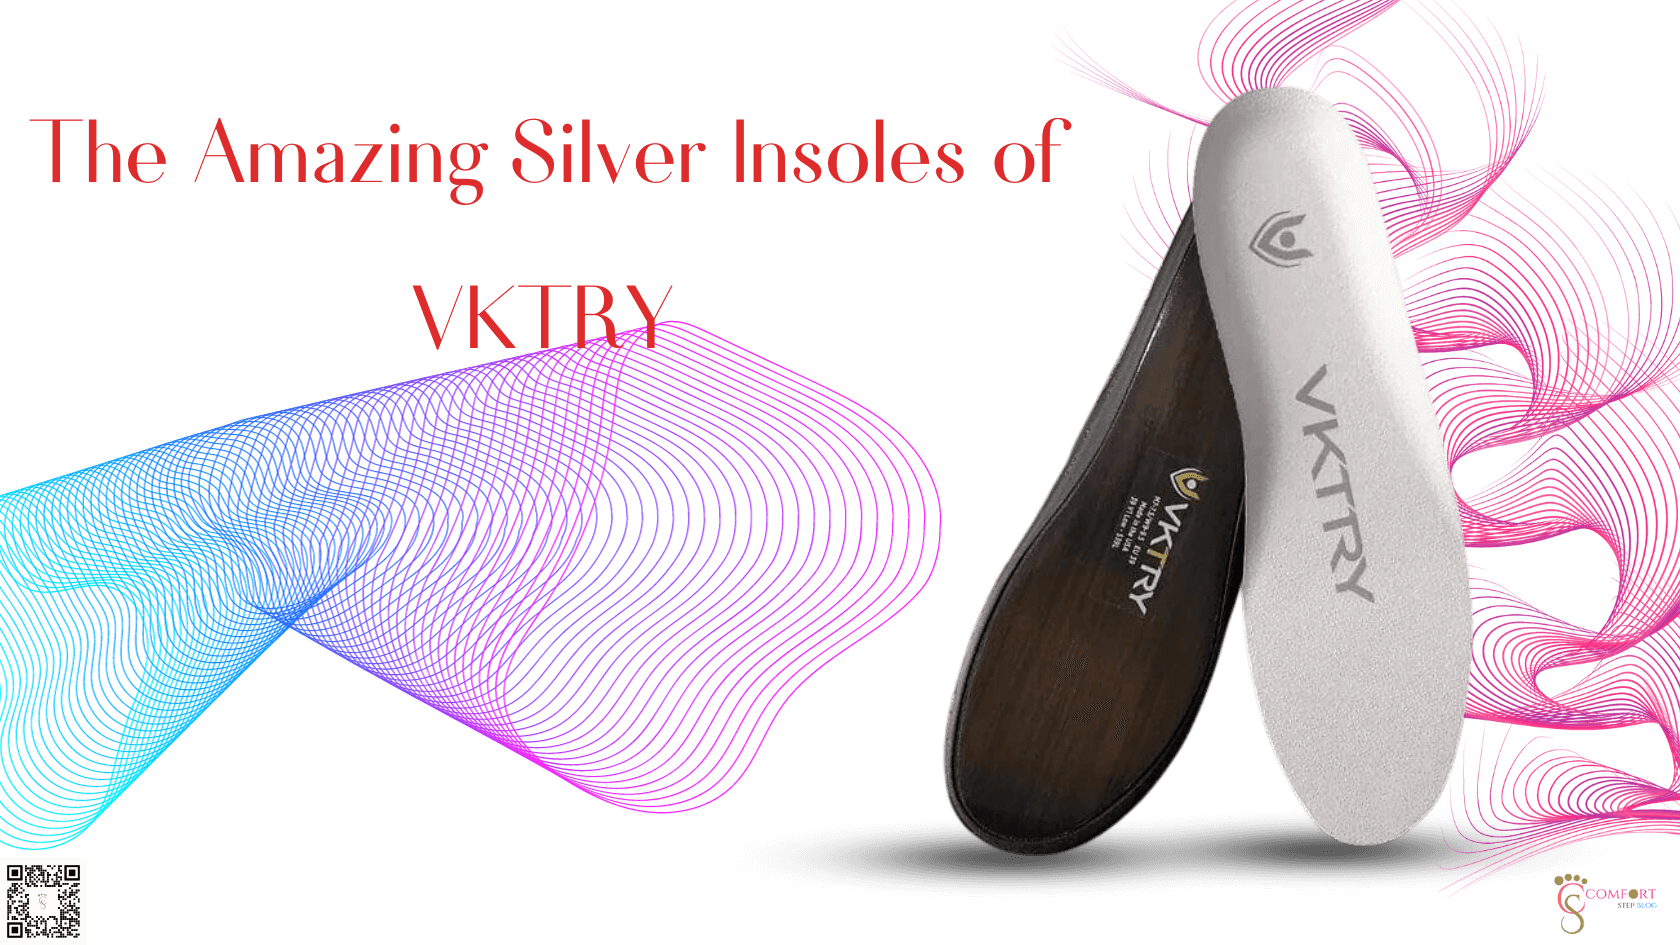 The Amazing Silver Insoles of VKTRY